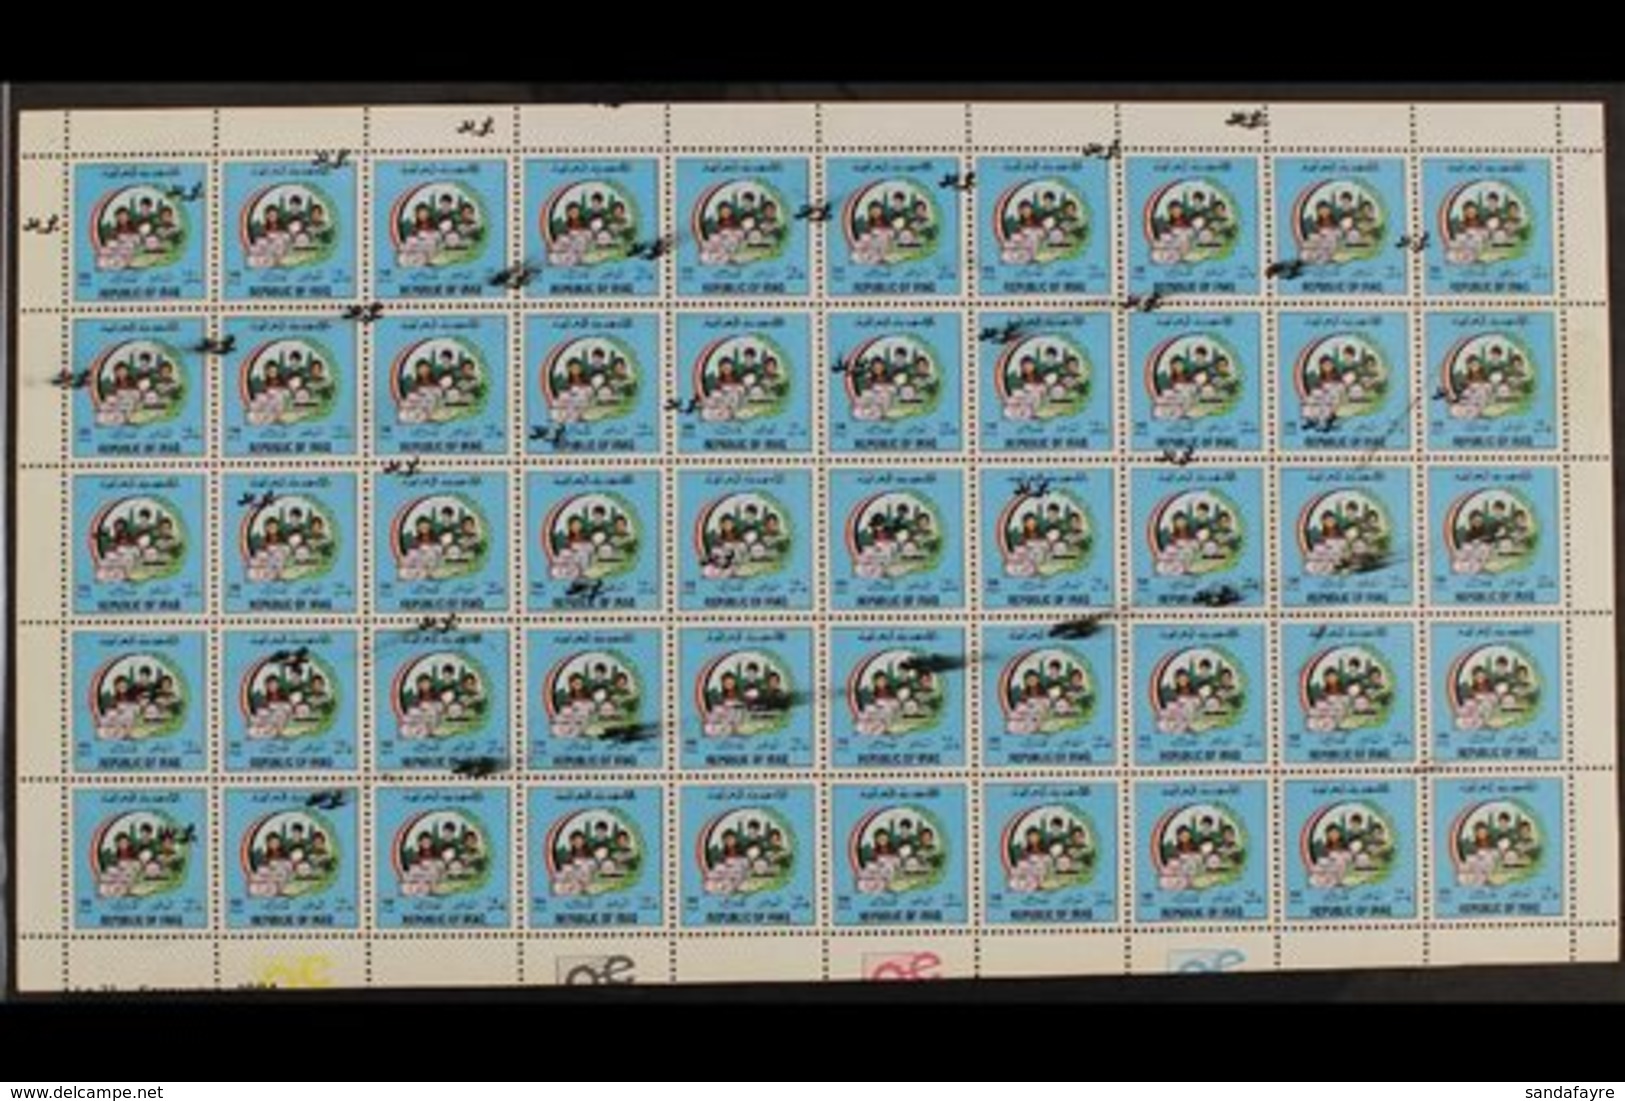 1989  150f Postal Savings Bank Overprint, SG 1861, Never Hinged Mint COMPLETE SHEET Of 50 With Dramatically MISPLACED DI - Irak